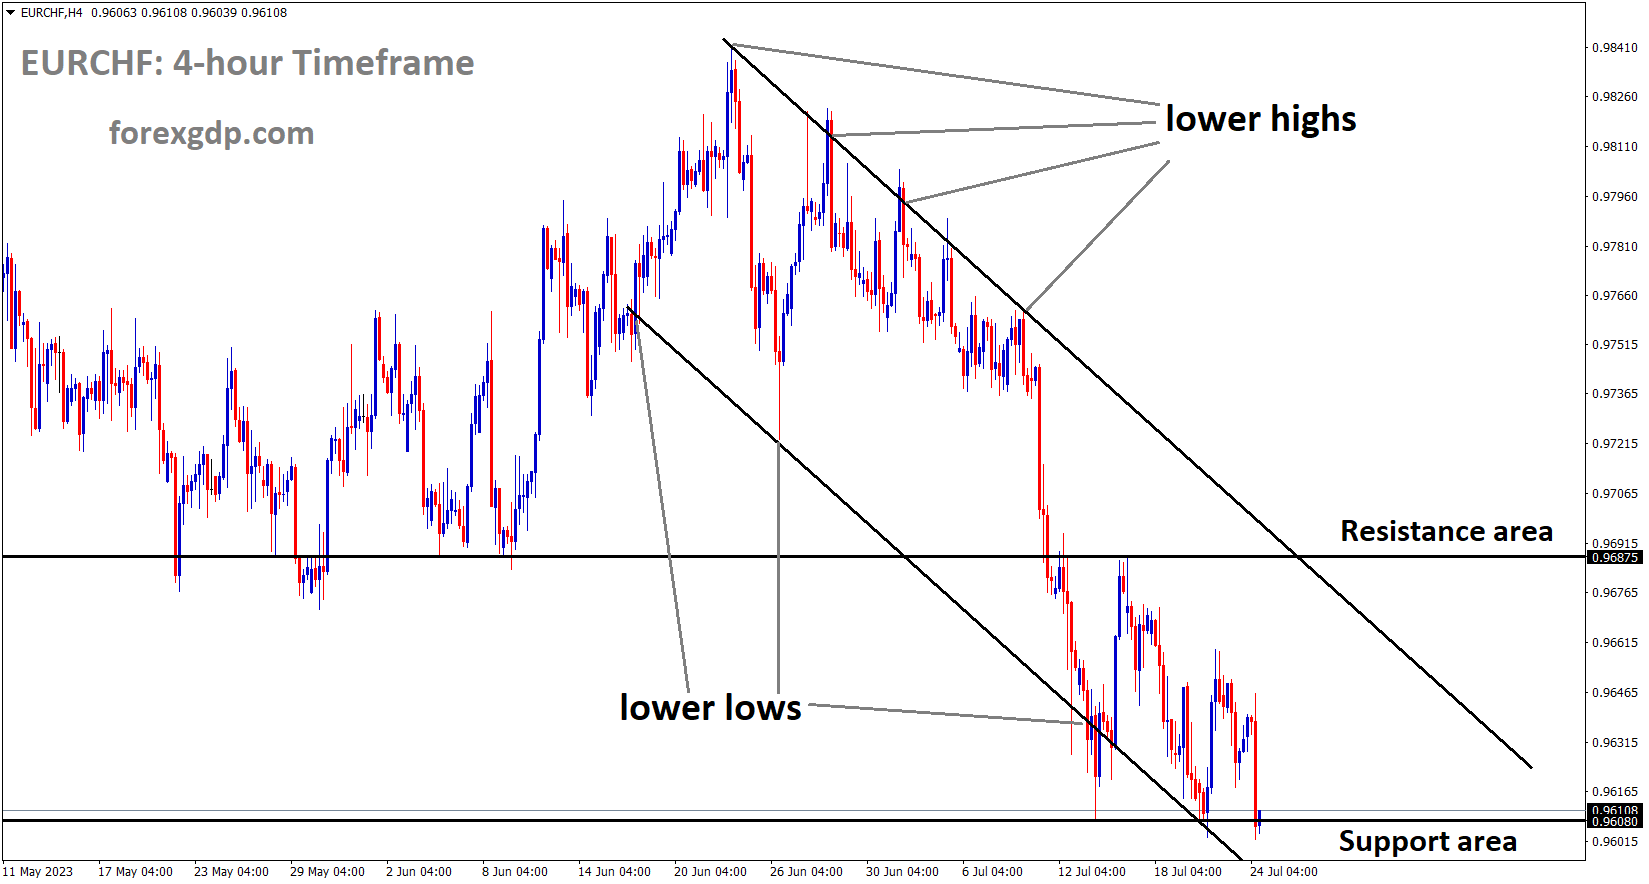 EURCHF is moving in the Descending channel and the market has reached the lower low area of the channel 2